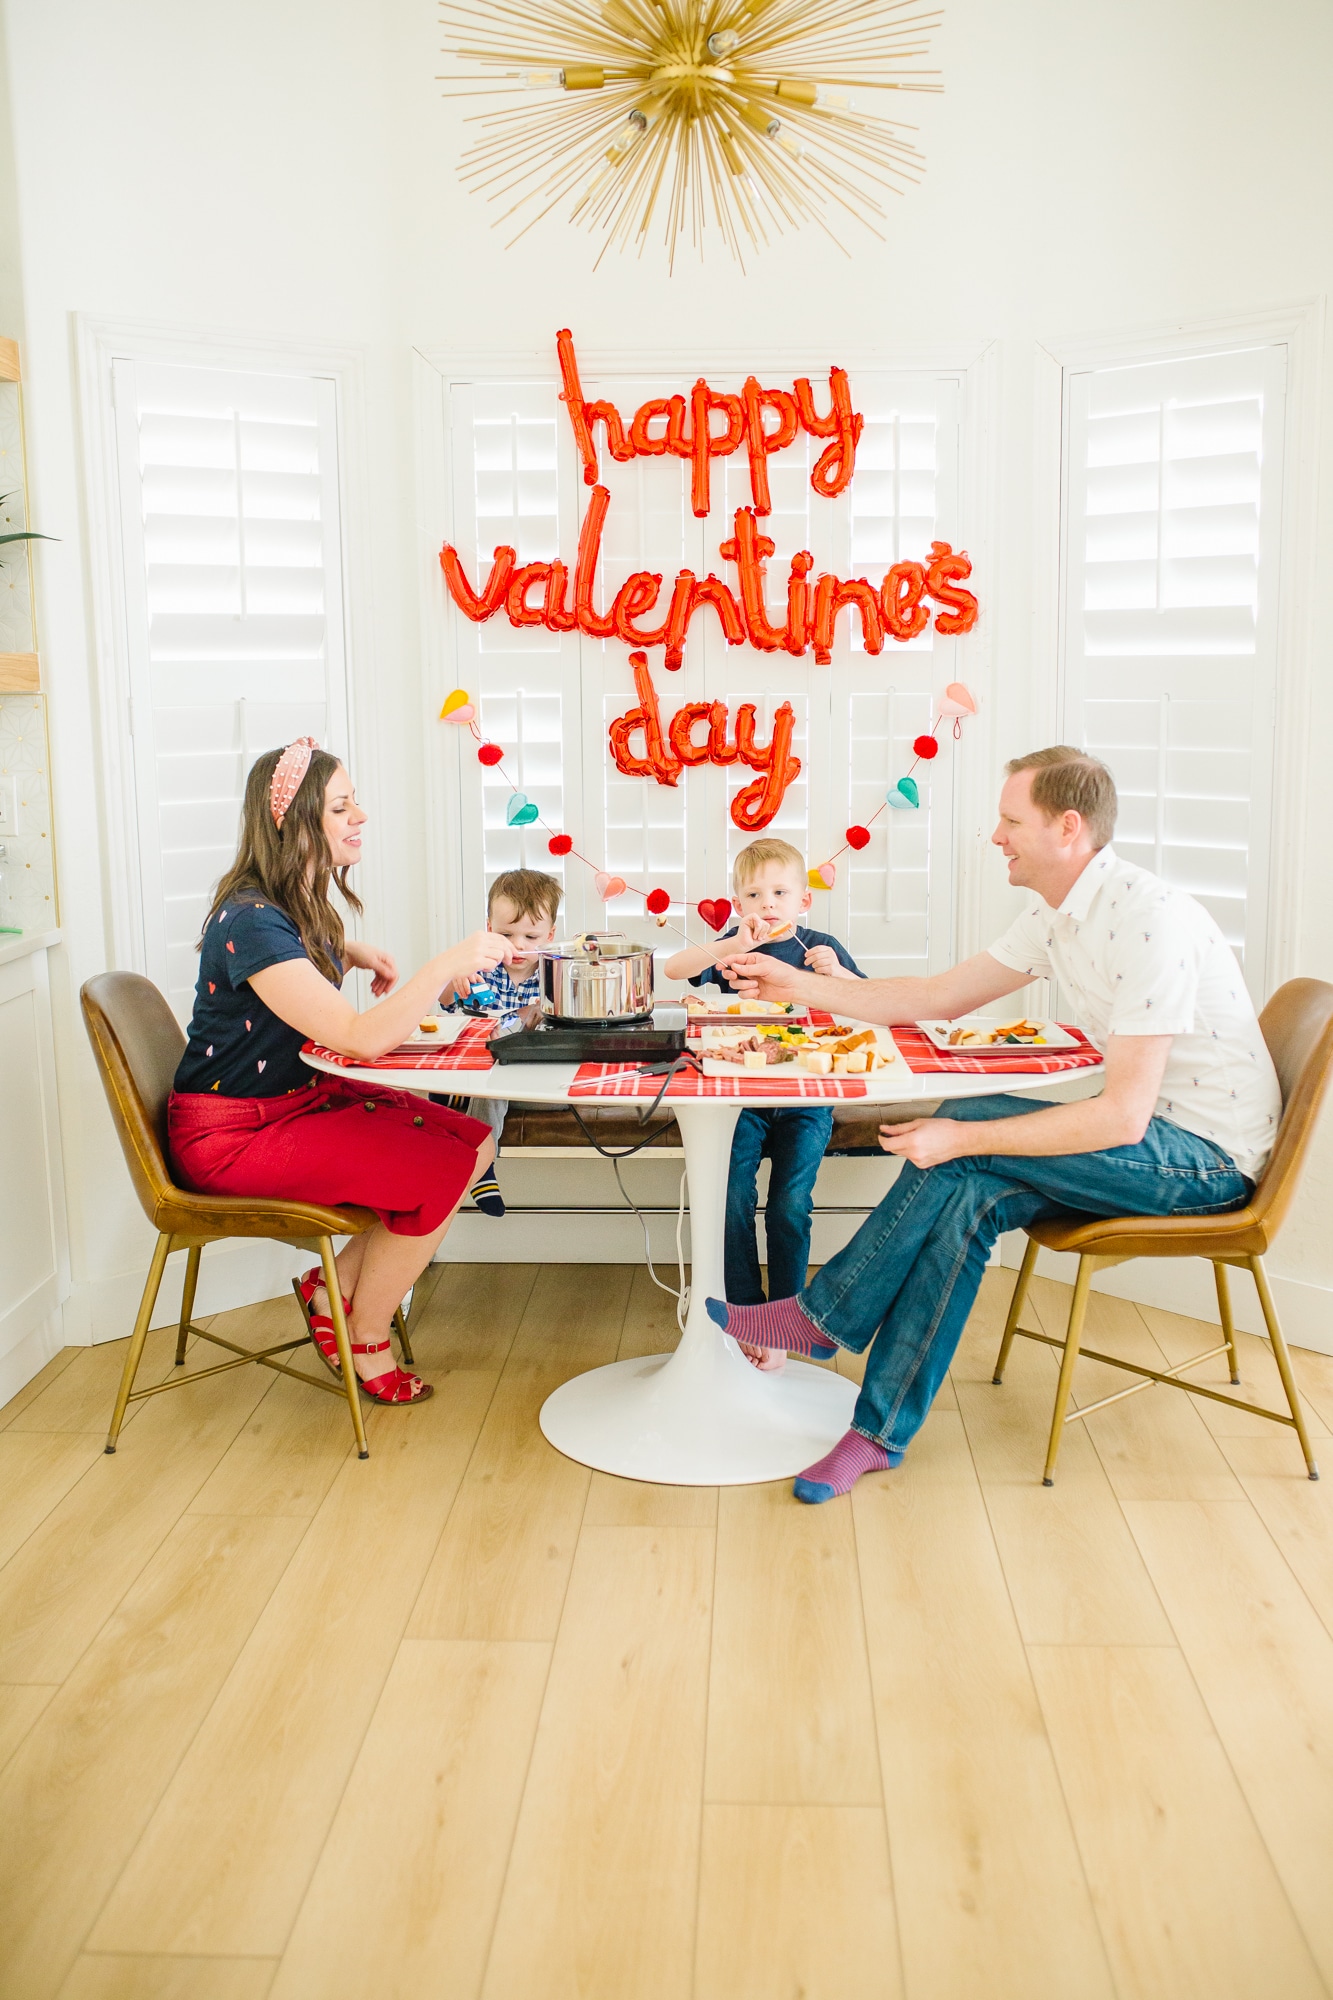 20 Valentine’s Day Ideas for Family Fun